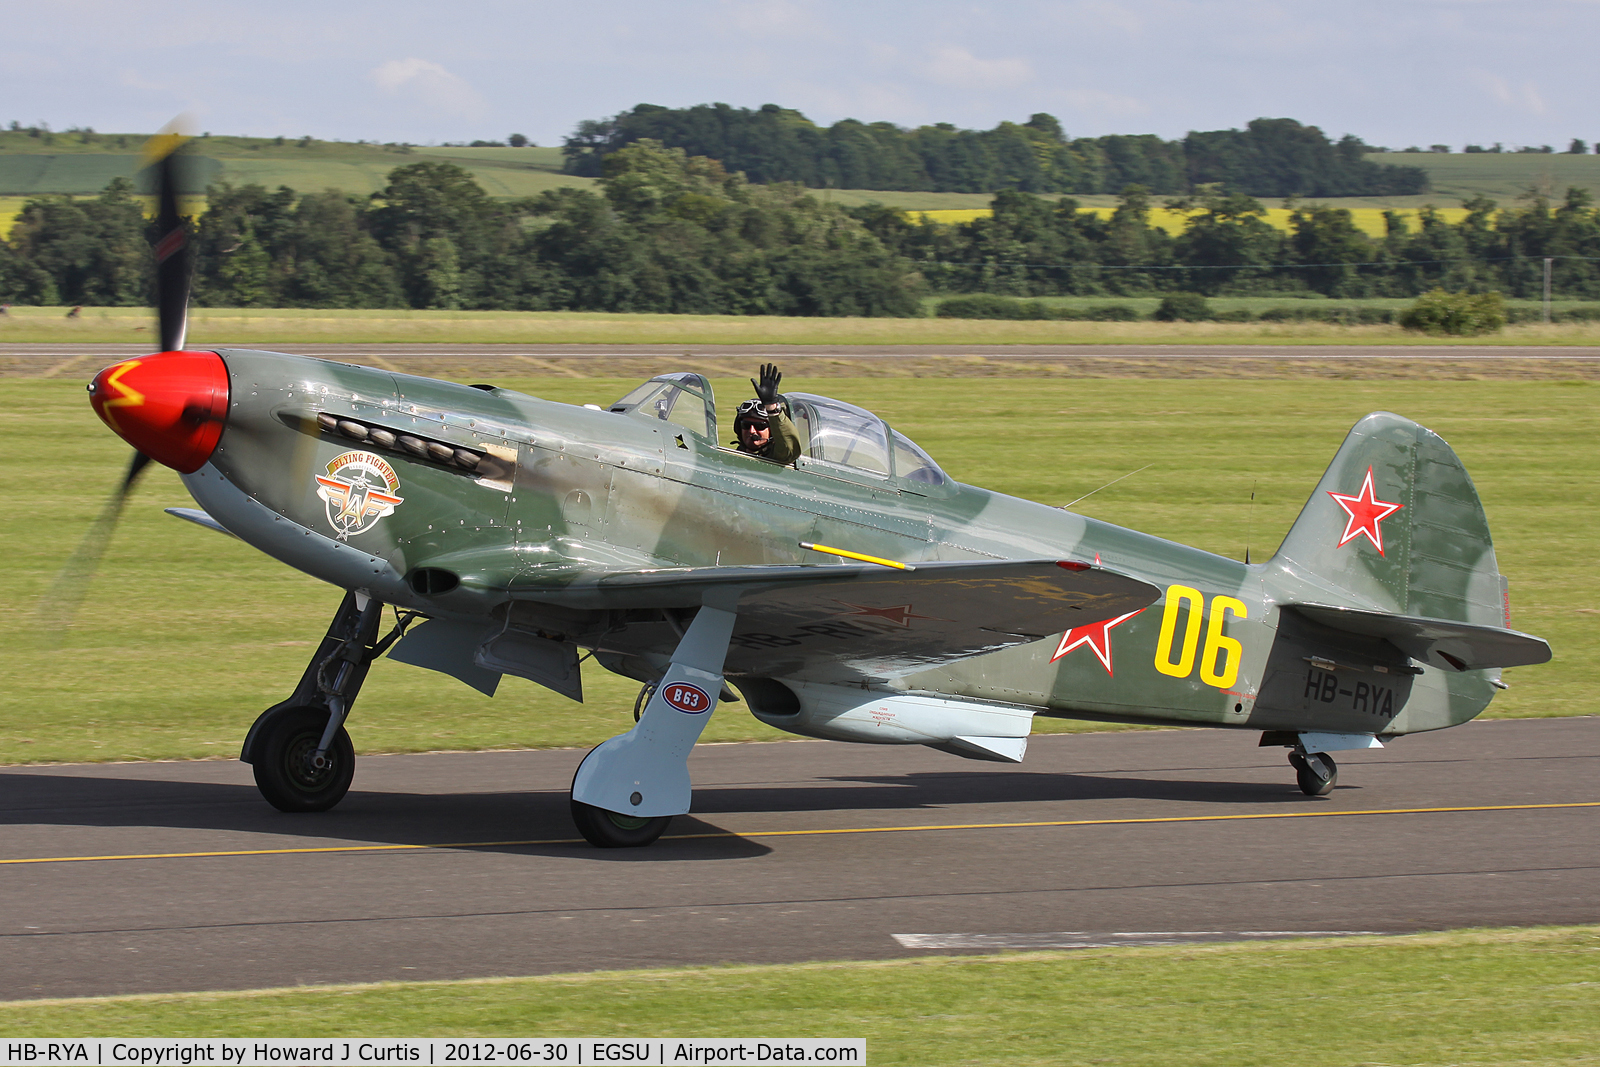 HB-RYA, Yakovlev Yak-9UM C/N 0470406, At Flying Legends 2012. Taxiing back after the last display.